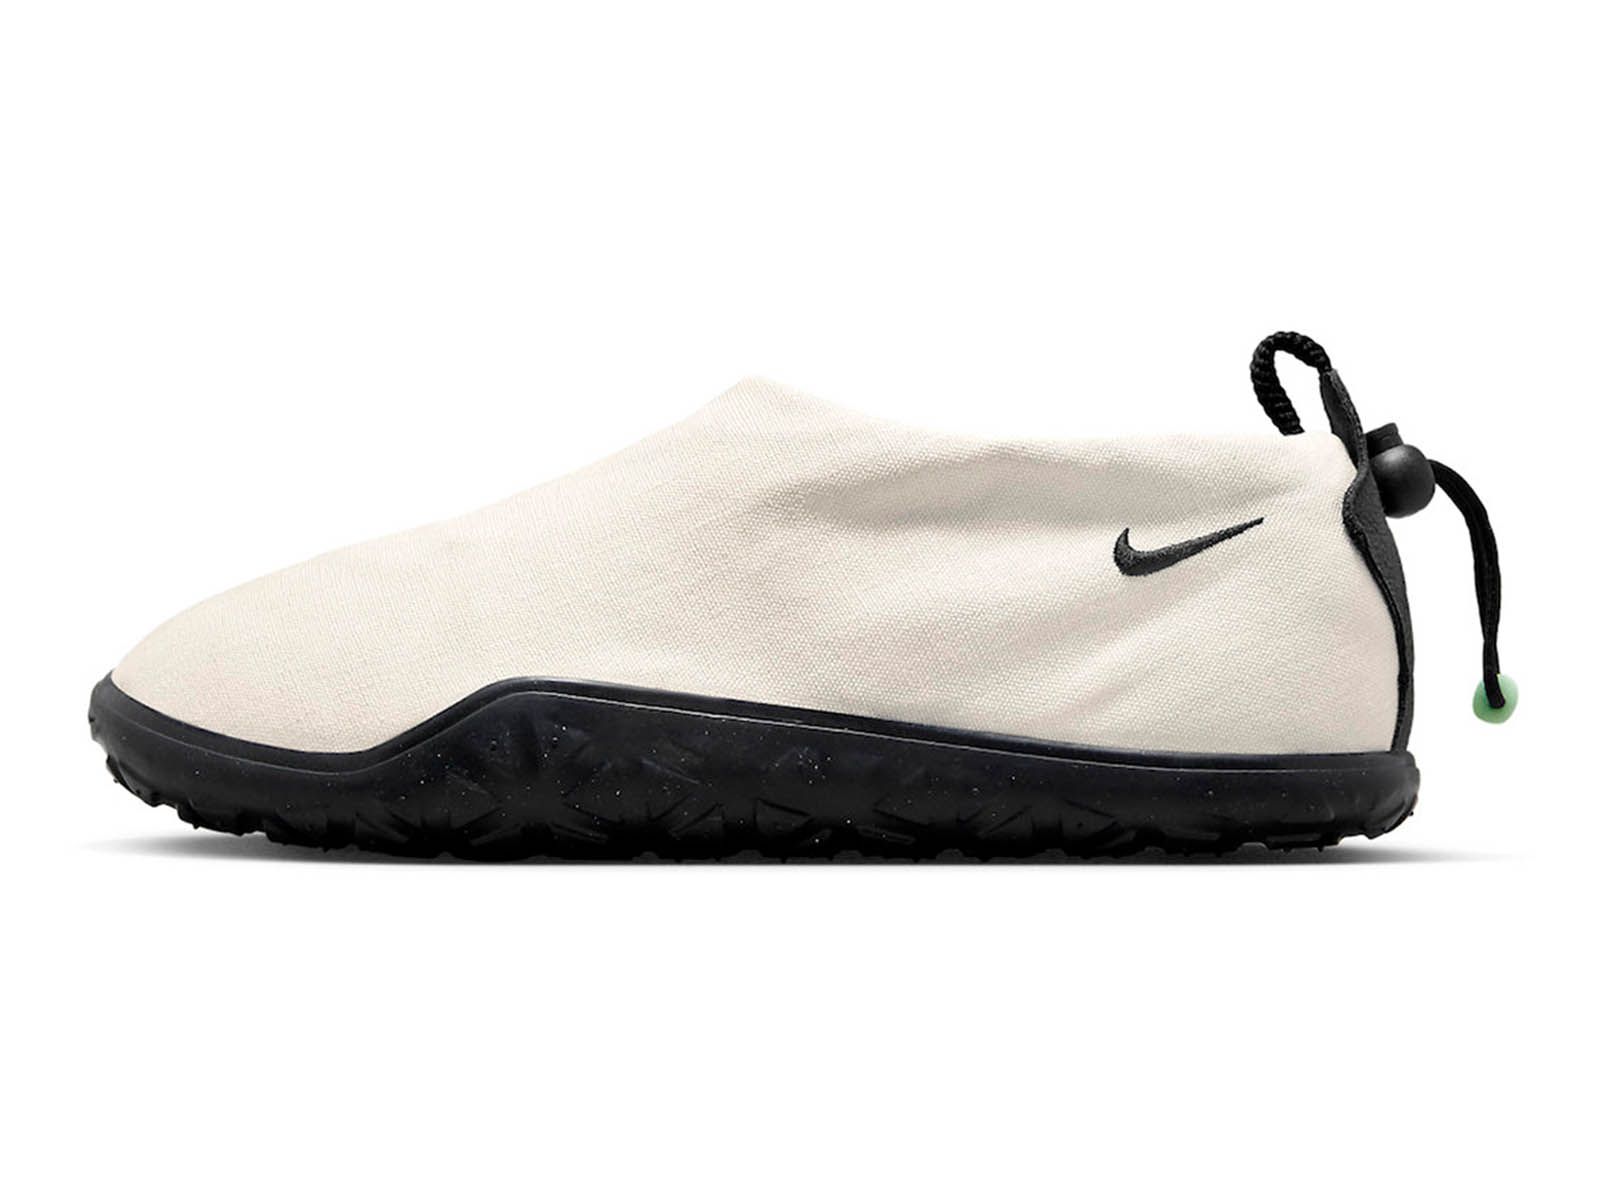 The Nike ACG Air Moc is back in “Sail/Black”